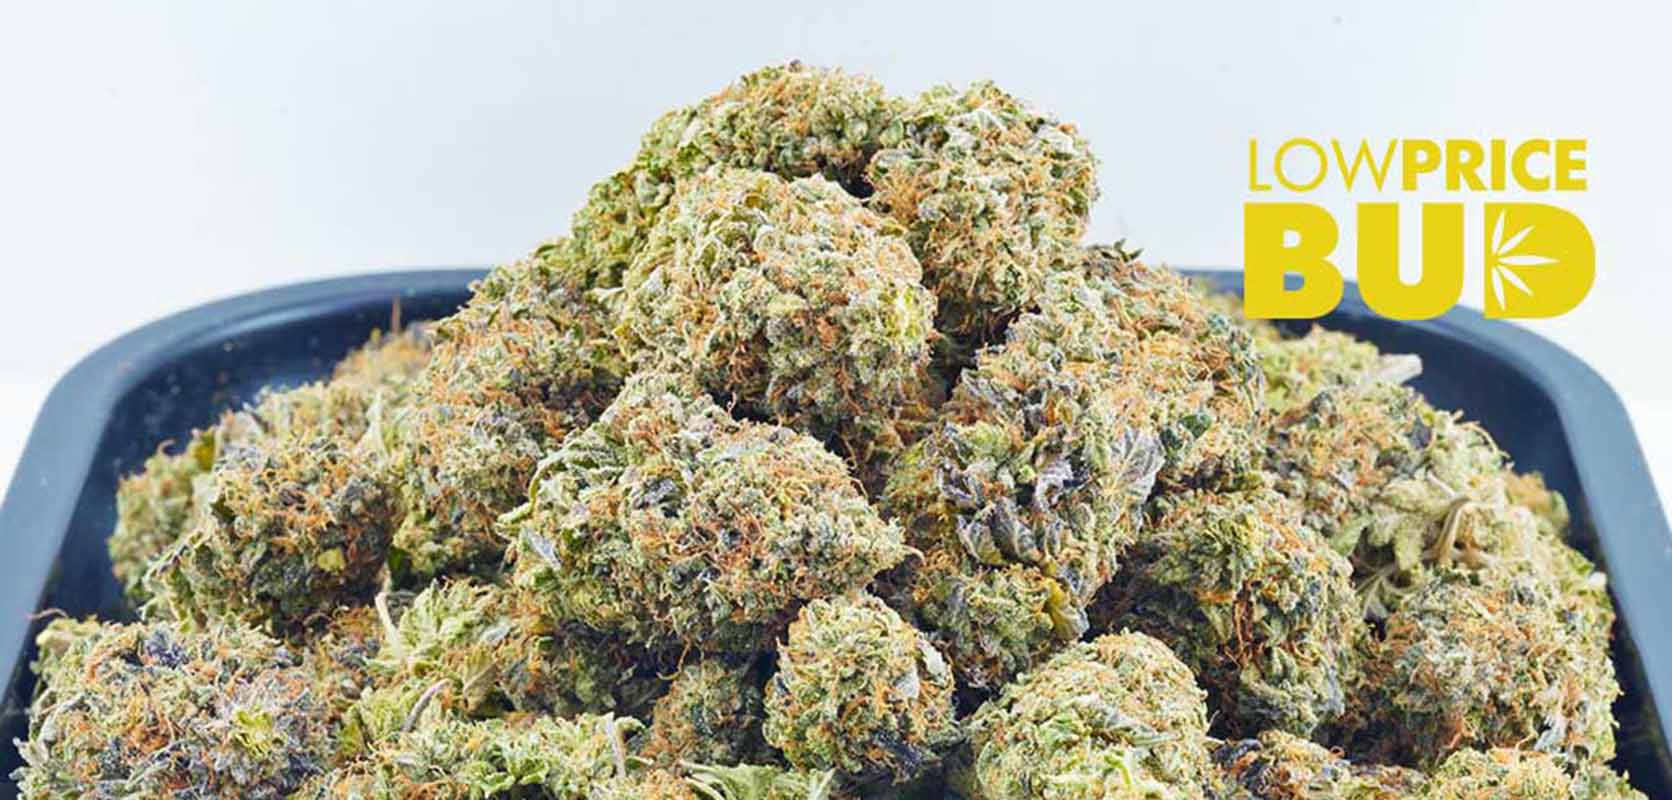 Buy weed AA Purple Kush at low price bud online dispensary in canada.